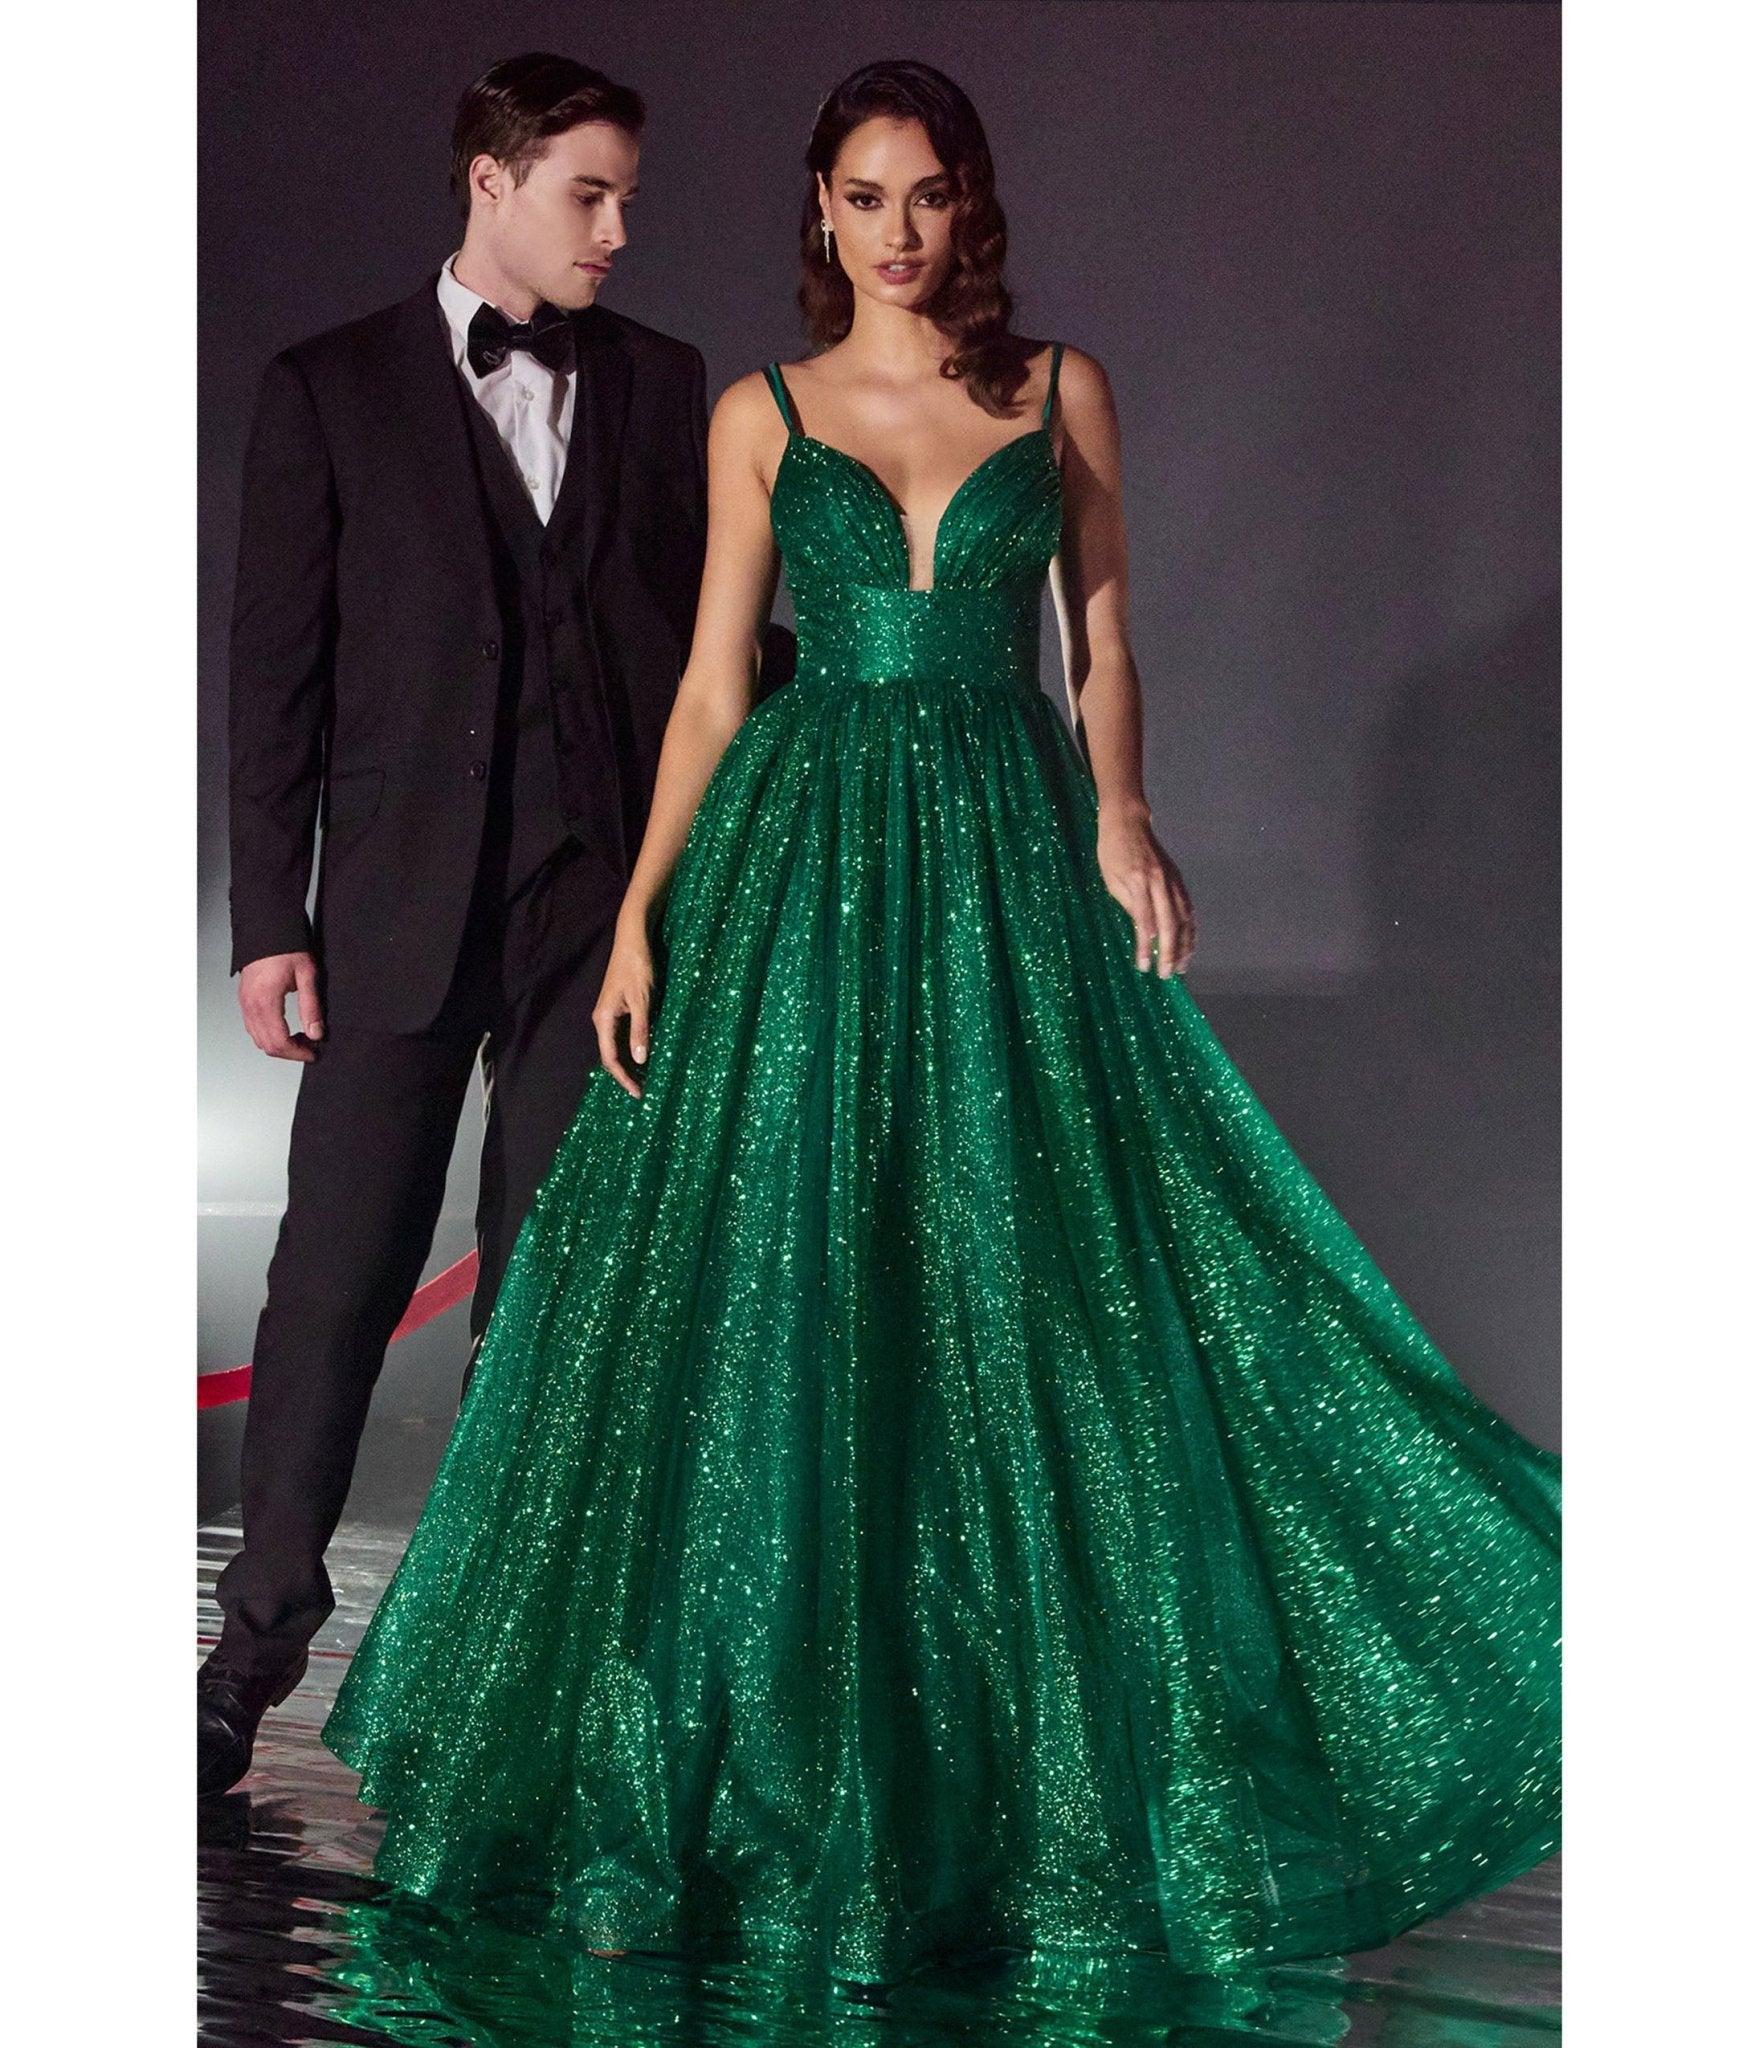 32 Hottest Prom Dress Ideas That'll Make You Swoon : Emerald Green Prom  Dress